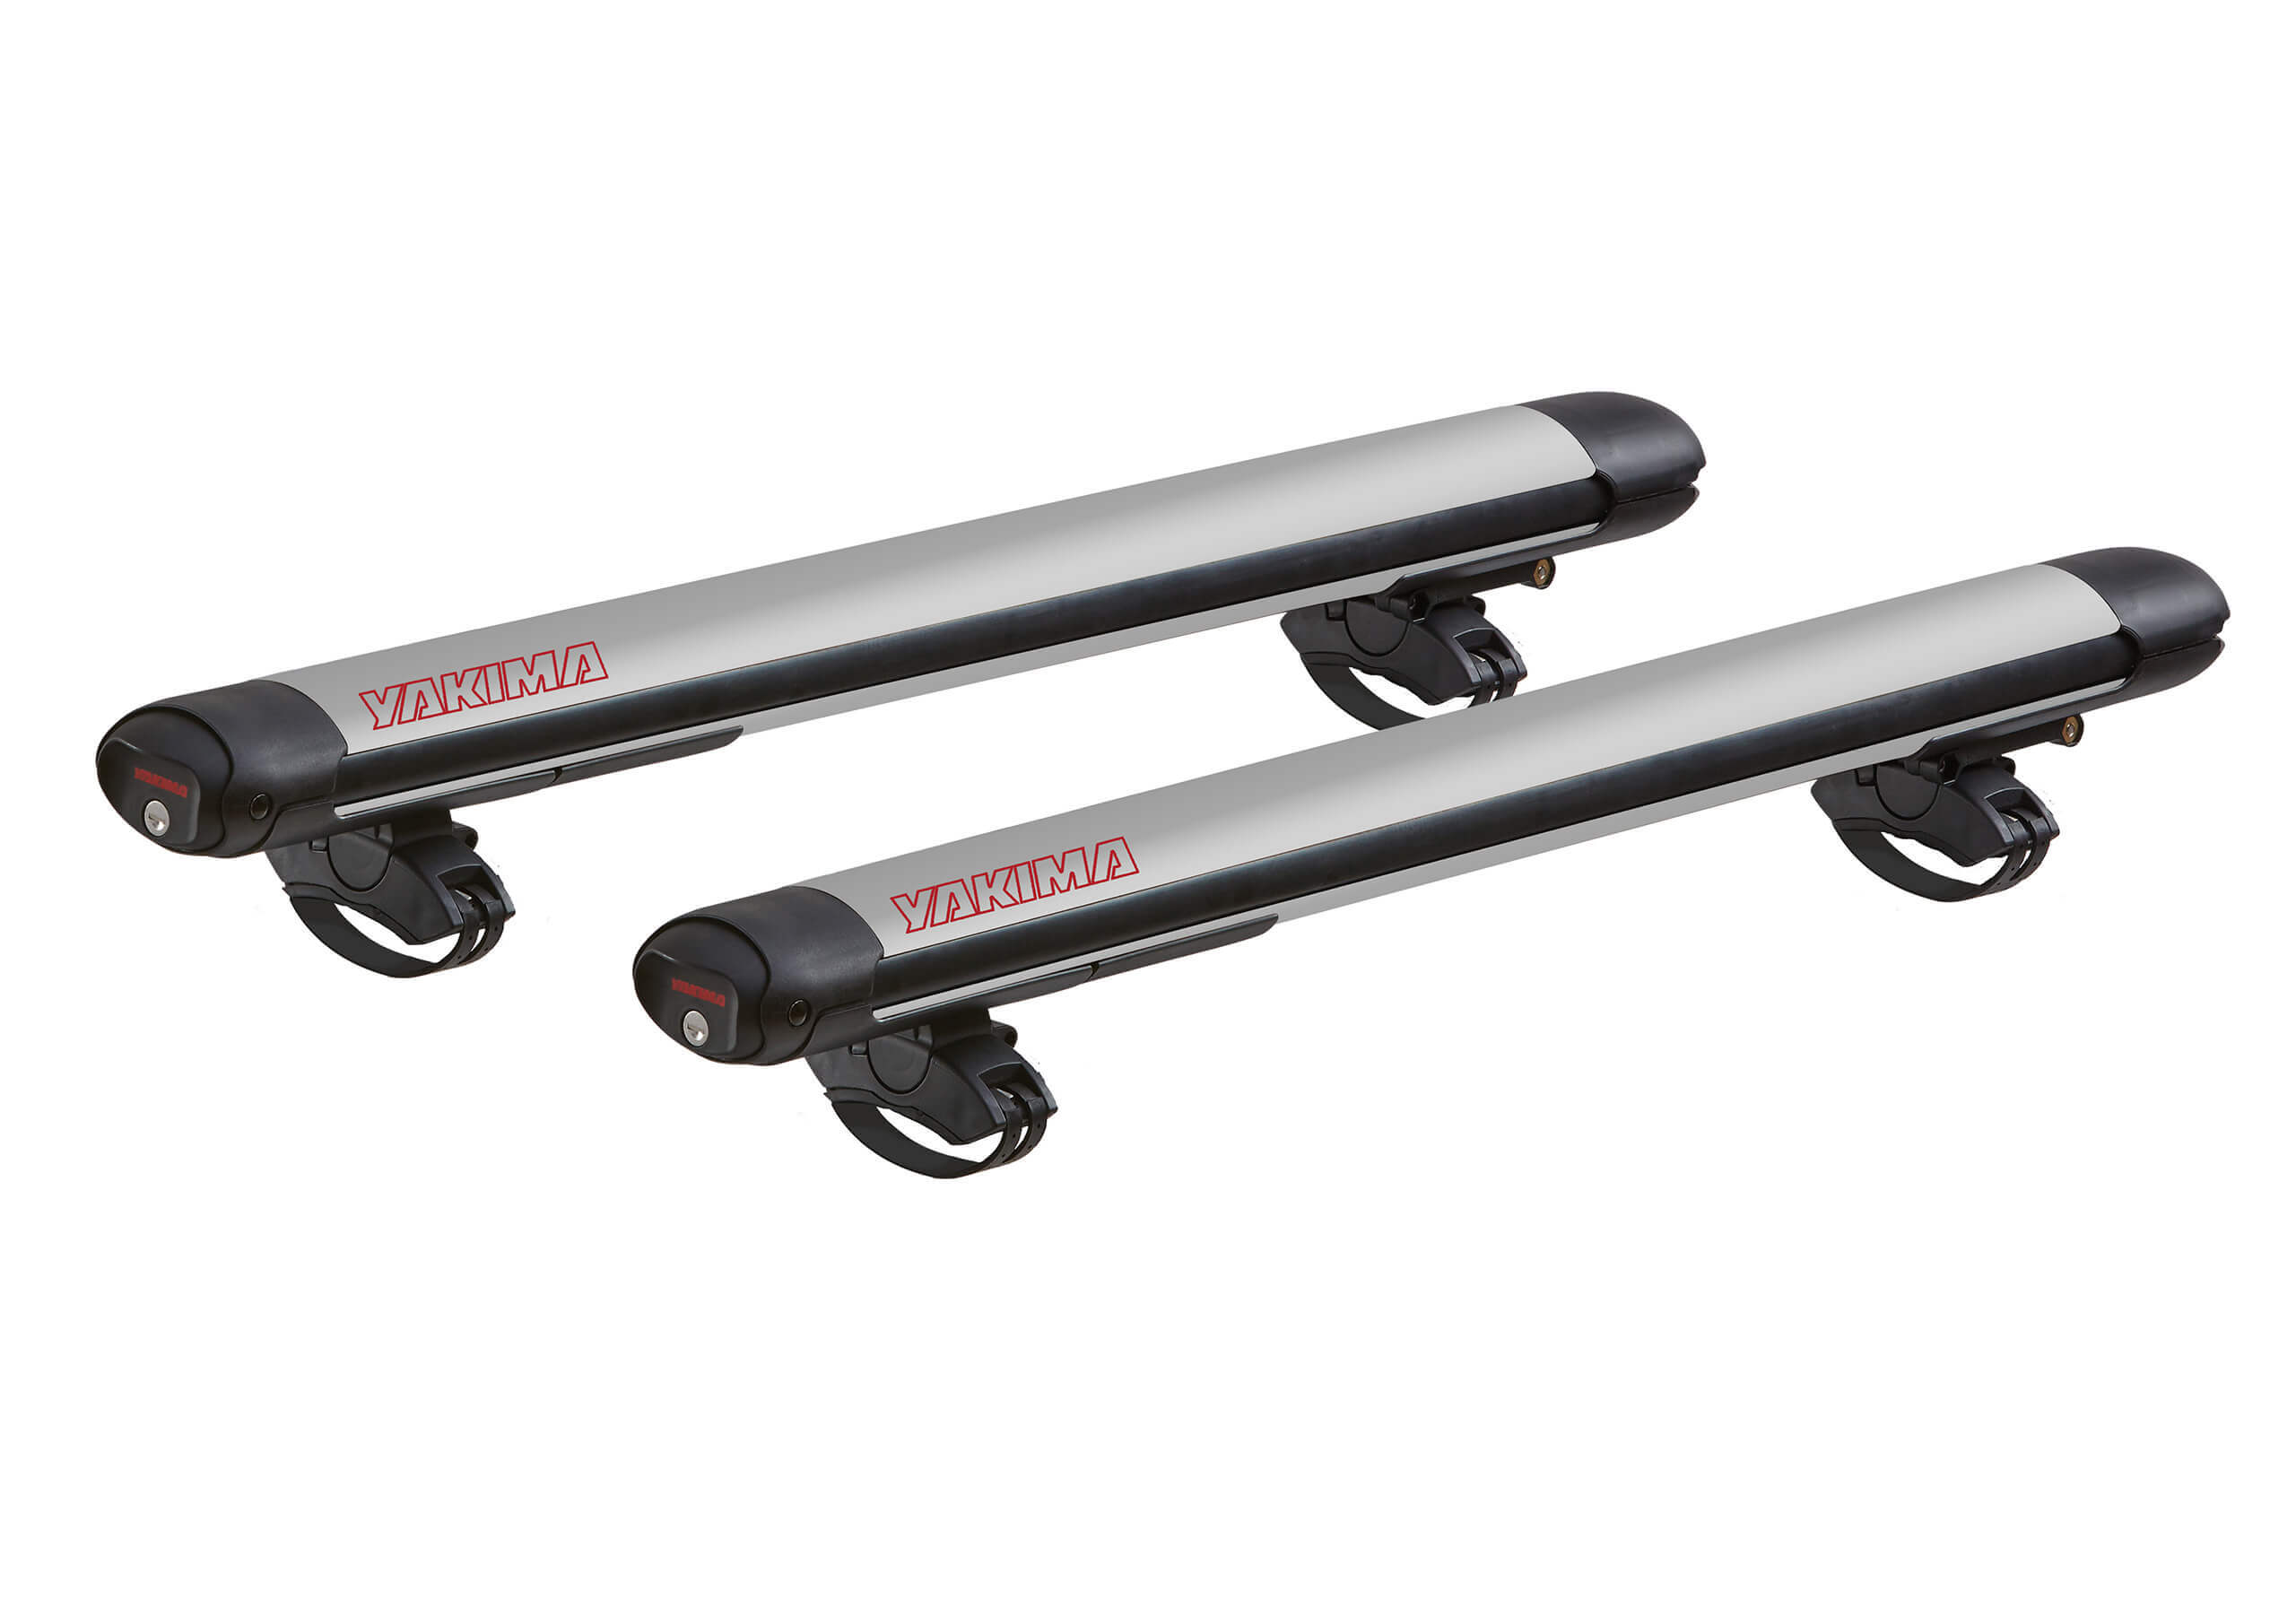 :Yakima FatCat Evo 6 silver- ski and board carrier with roof bars